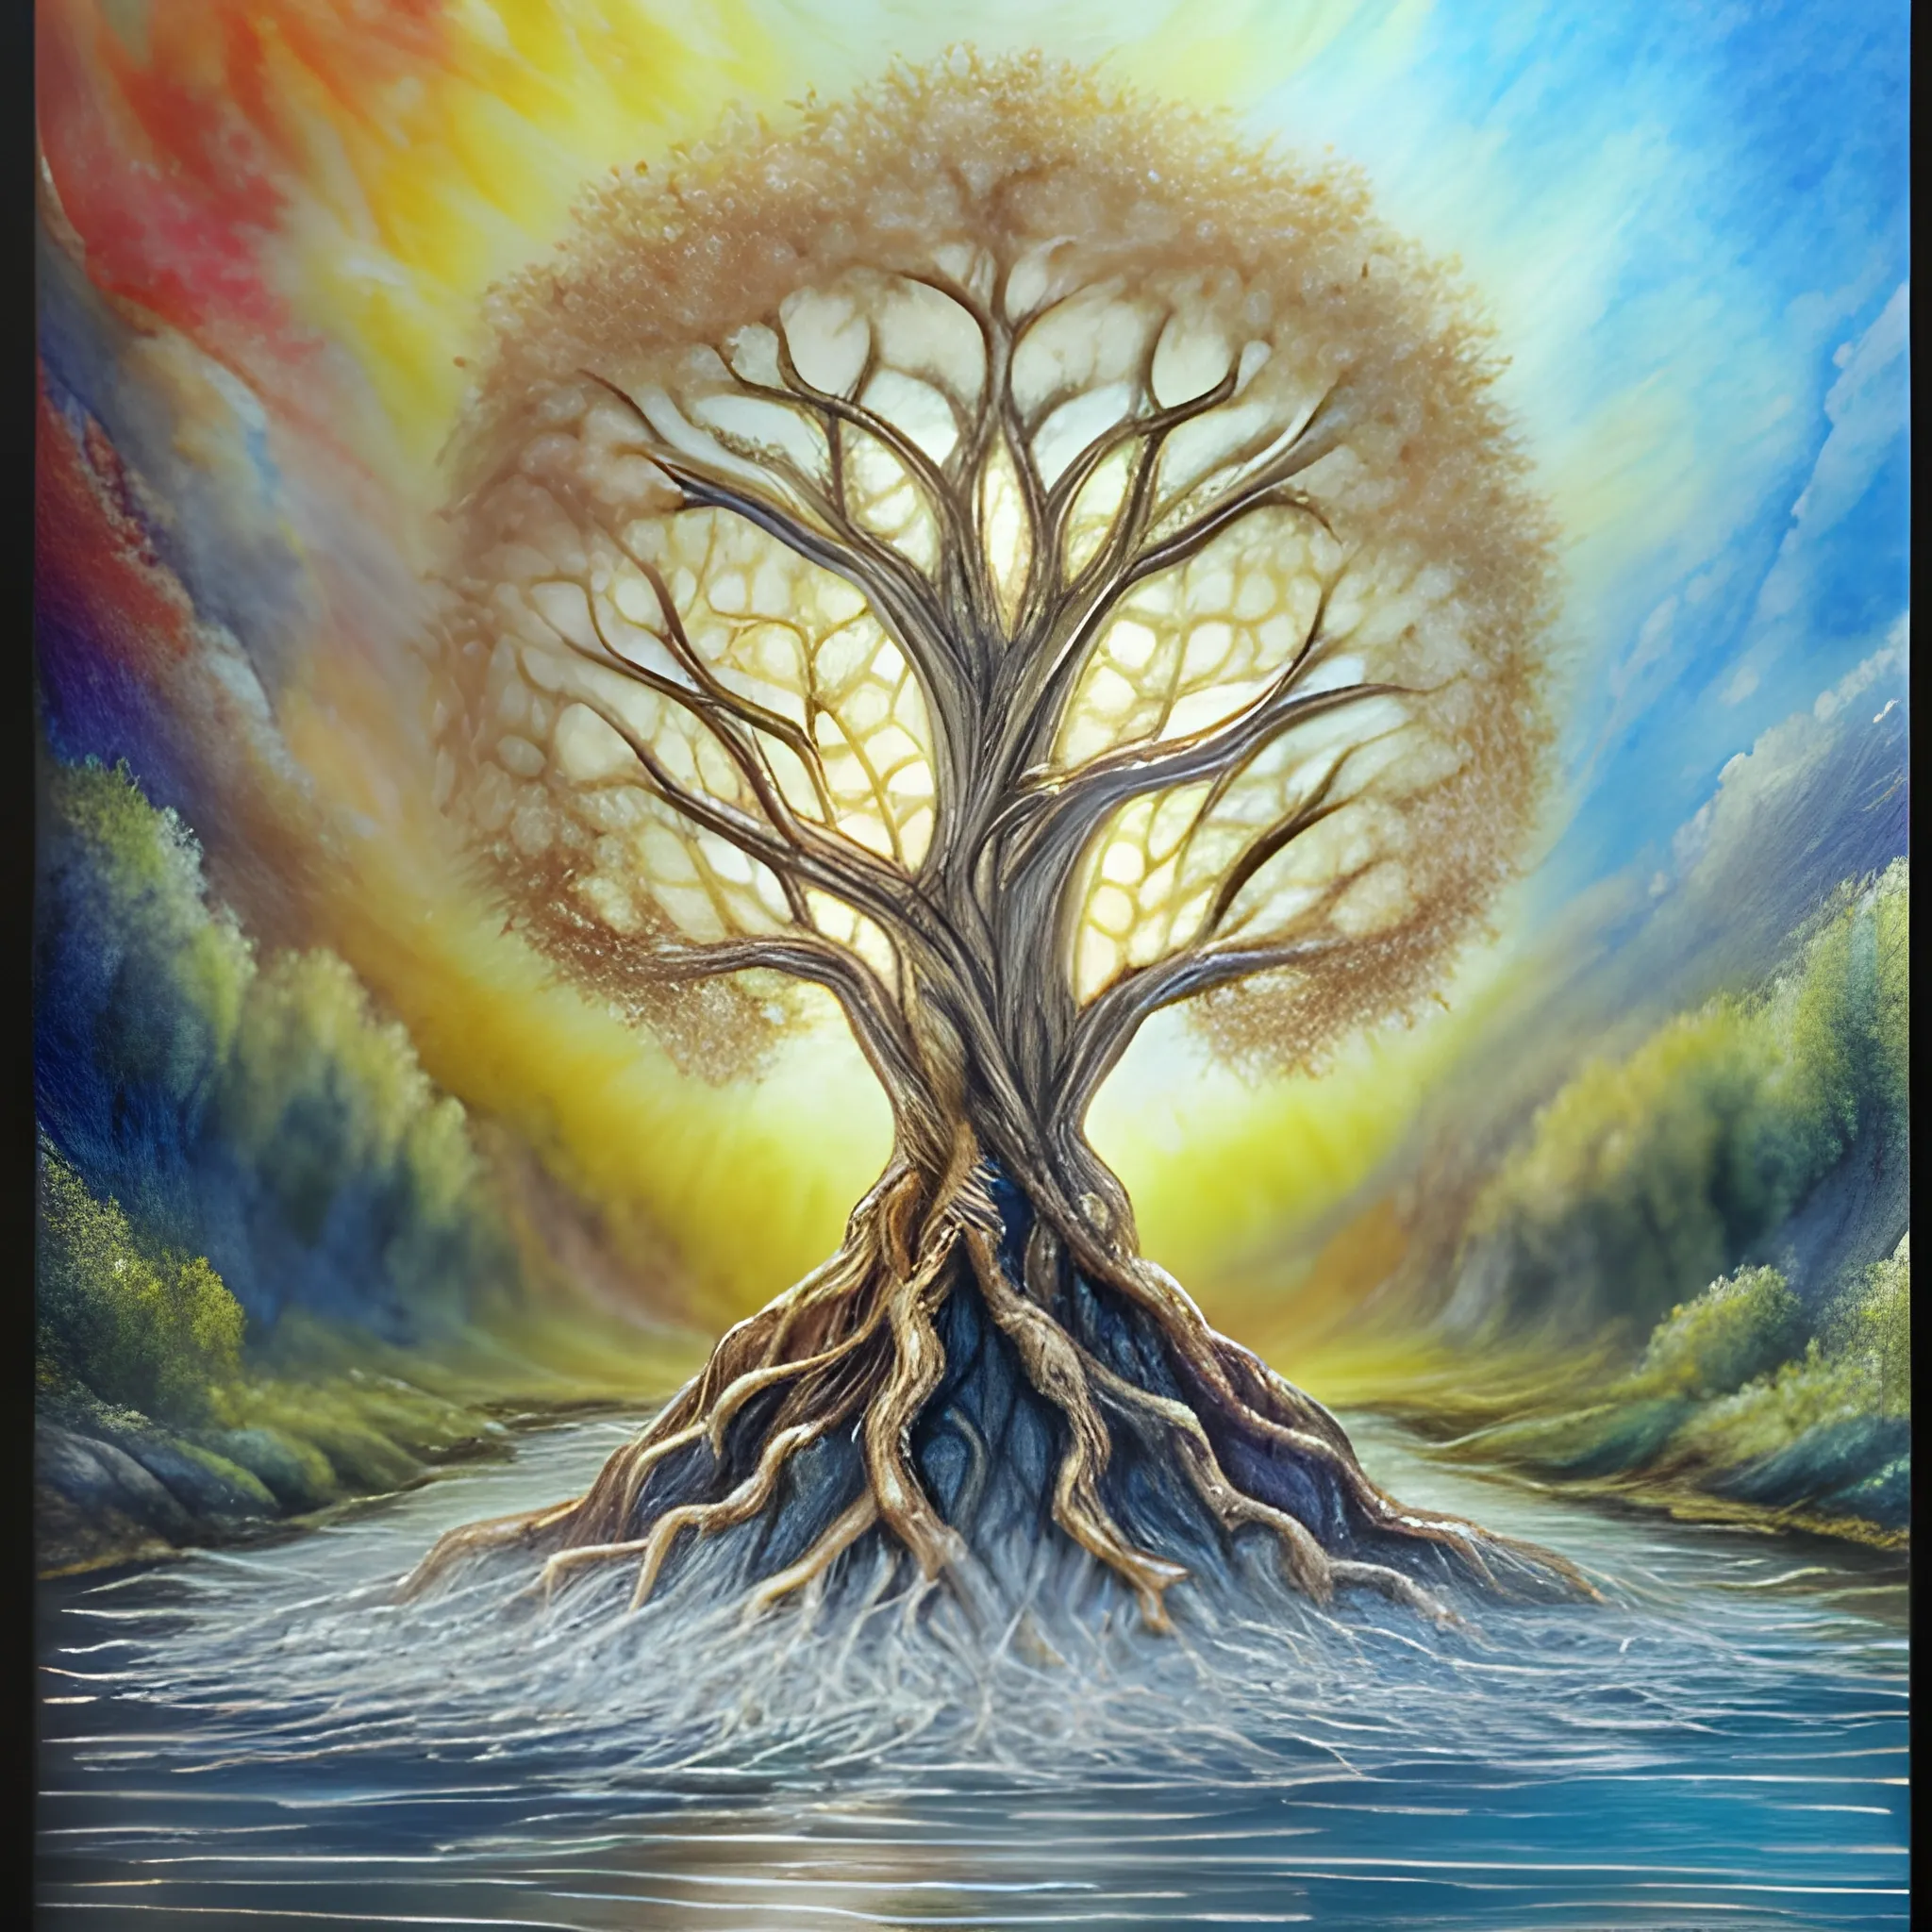 Draw heaven from a spiritual theological point of view, as the Bible describes it when Jesus comes in glory and majesty and takes his chosen people. It must have the tree of life, the river of life, streets of gold and the gates of the city with the precious stones that the Bible says., Pencil Sketch, Oil Painting, Water Color, 3D, Water Color